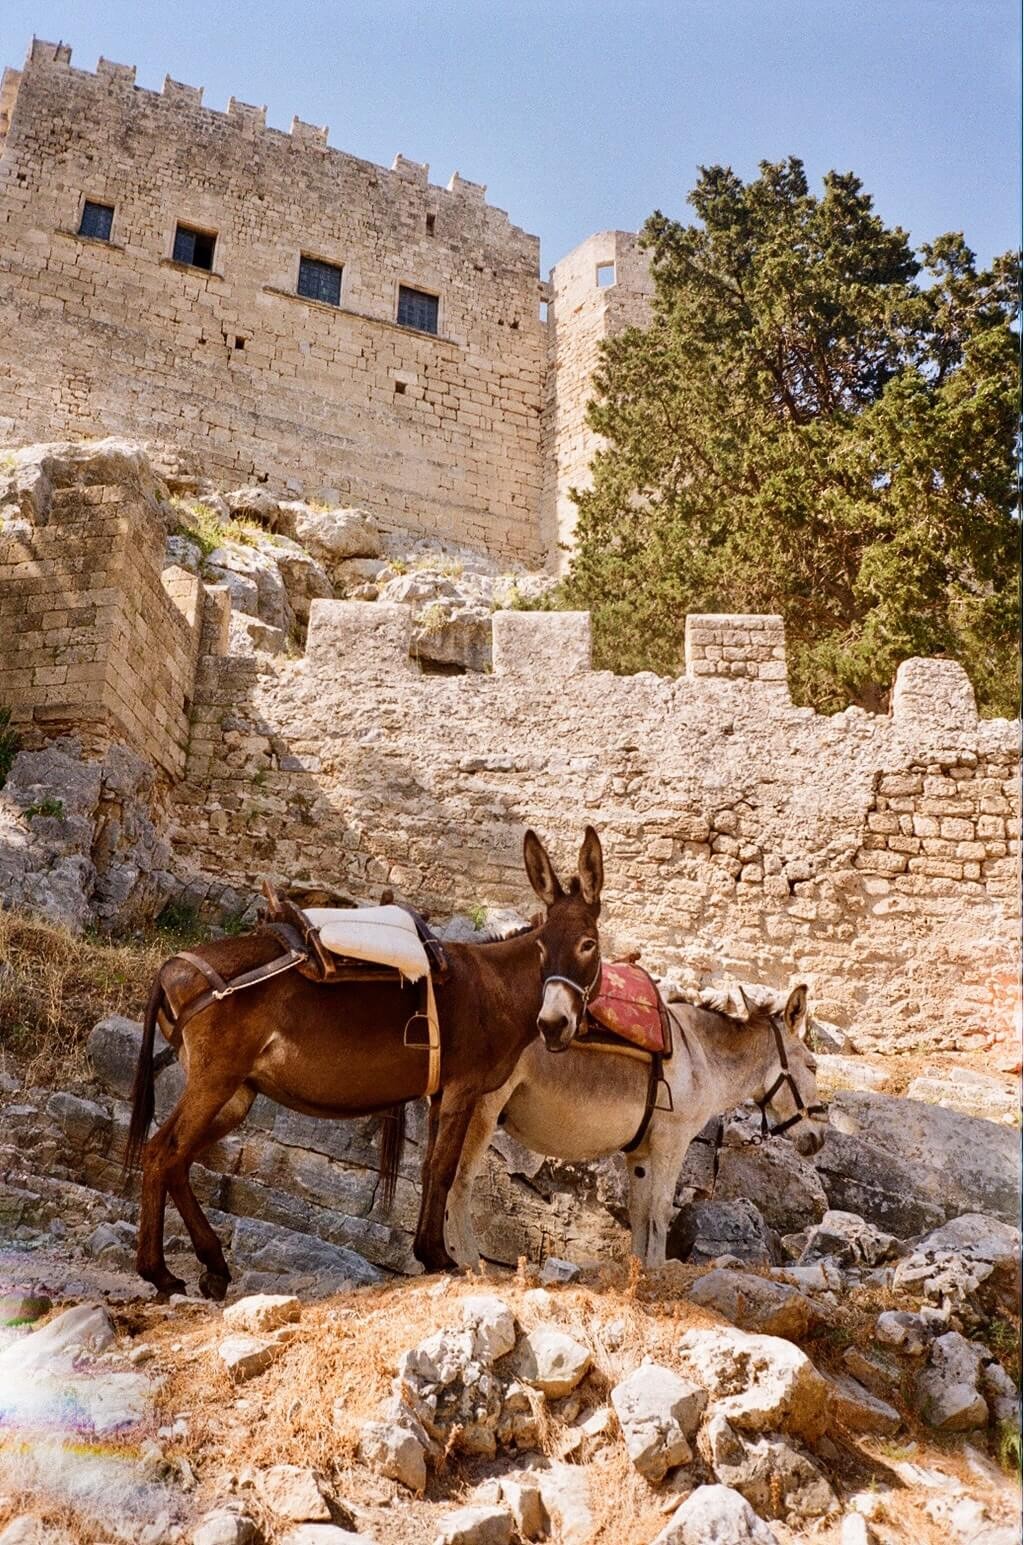 A brown donkey and a white donkey stood on rocky ground at the entrance to Lindos Acropolis.